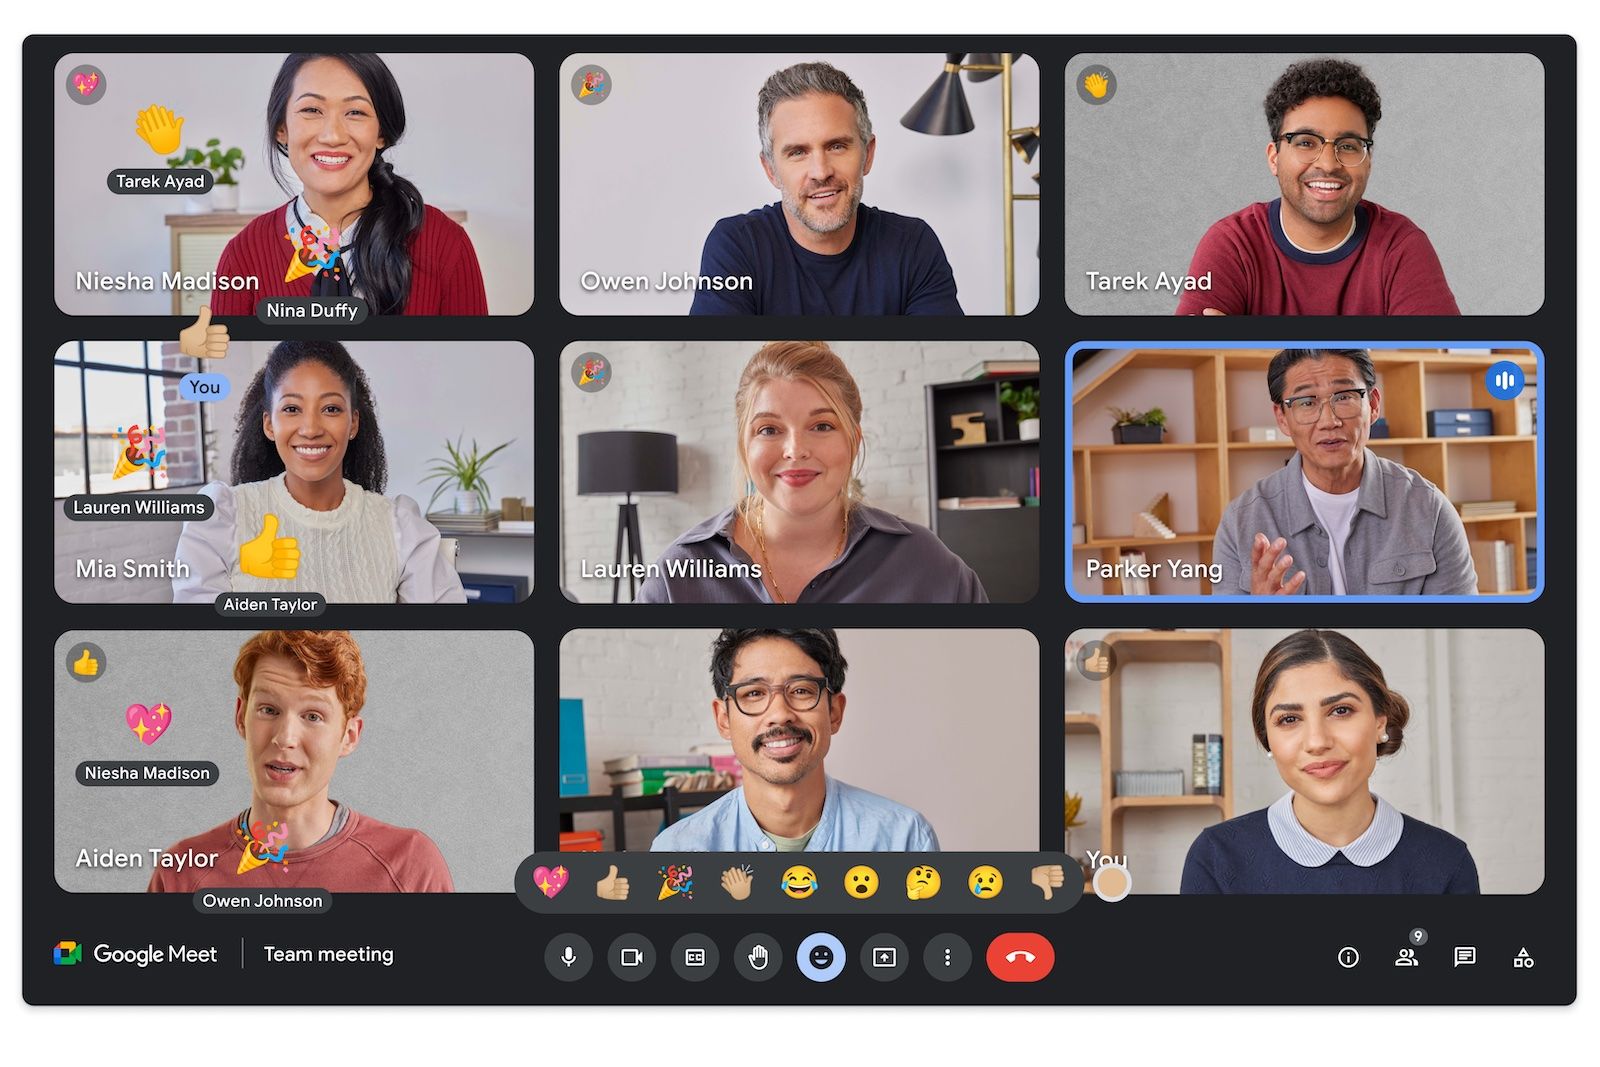 Screenshot showing a Google Meet call with emoji reactions at the bottom of the screen